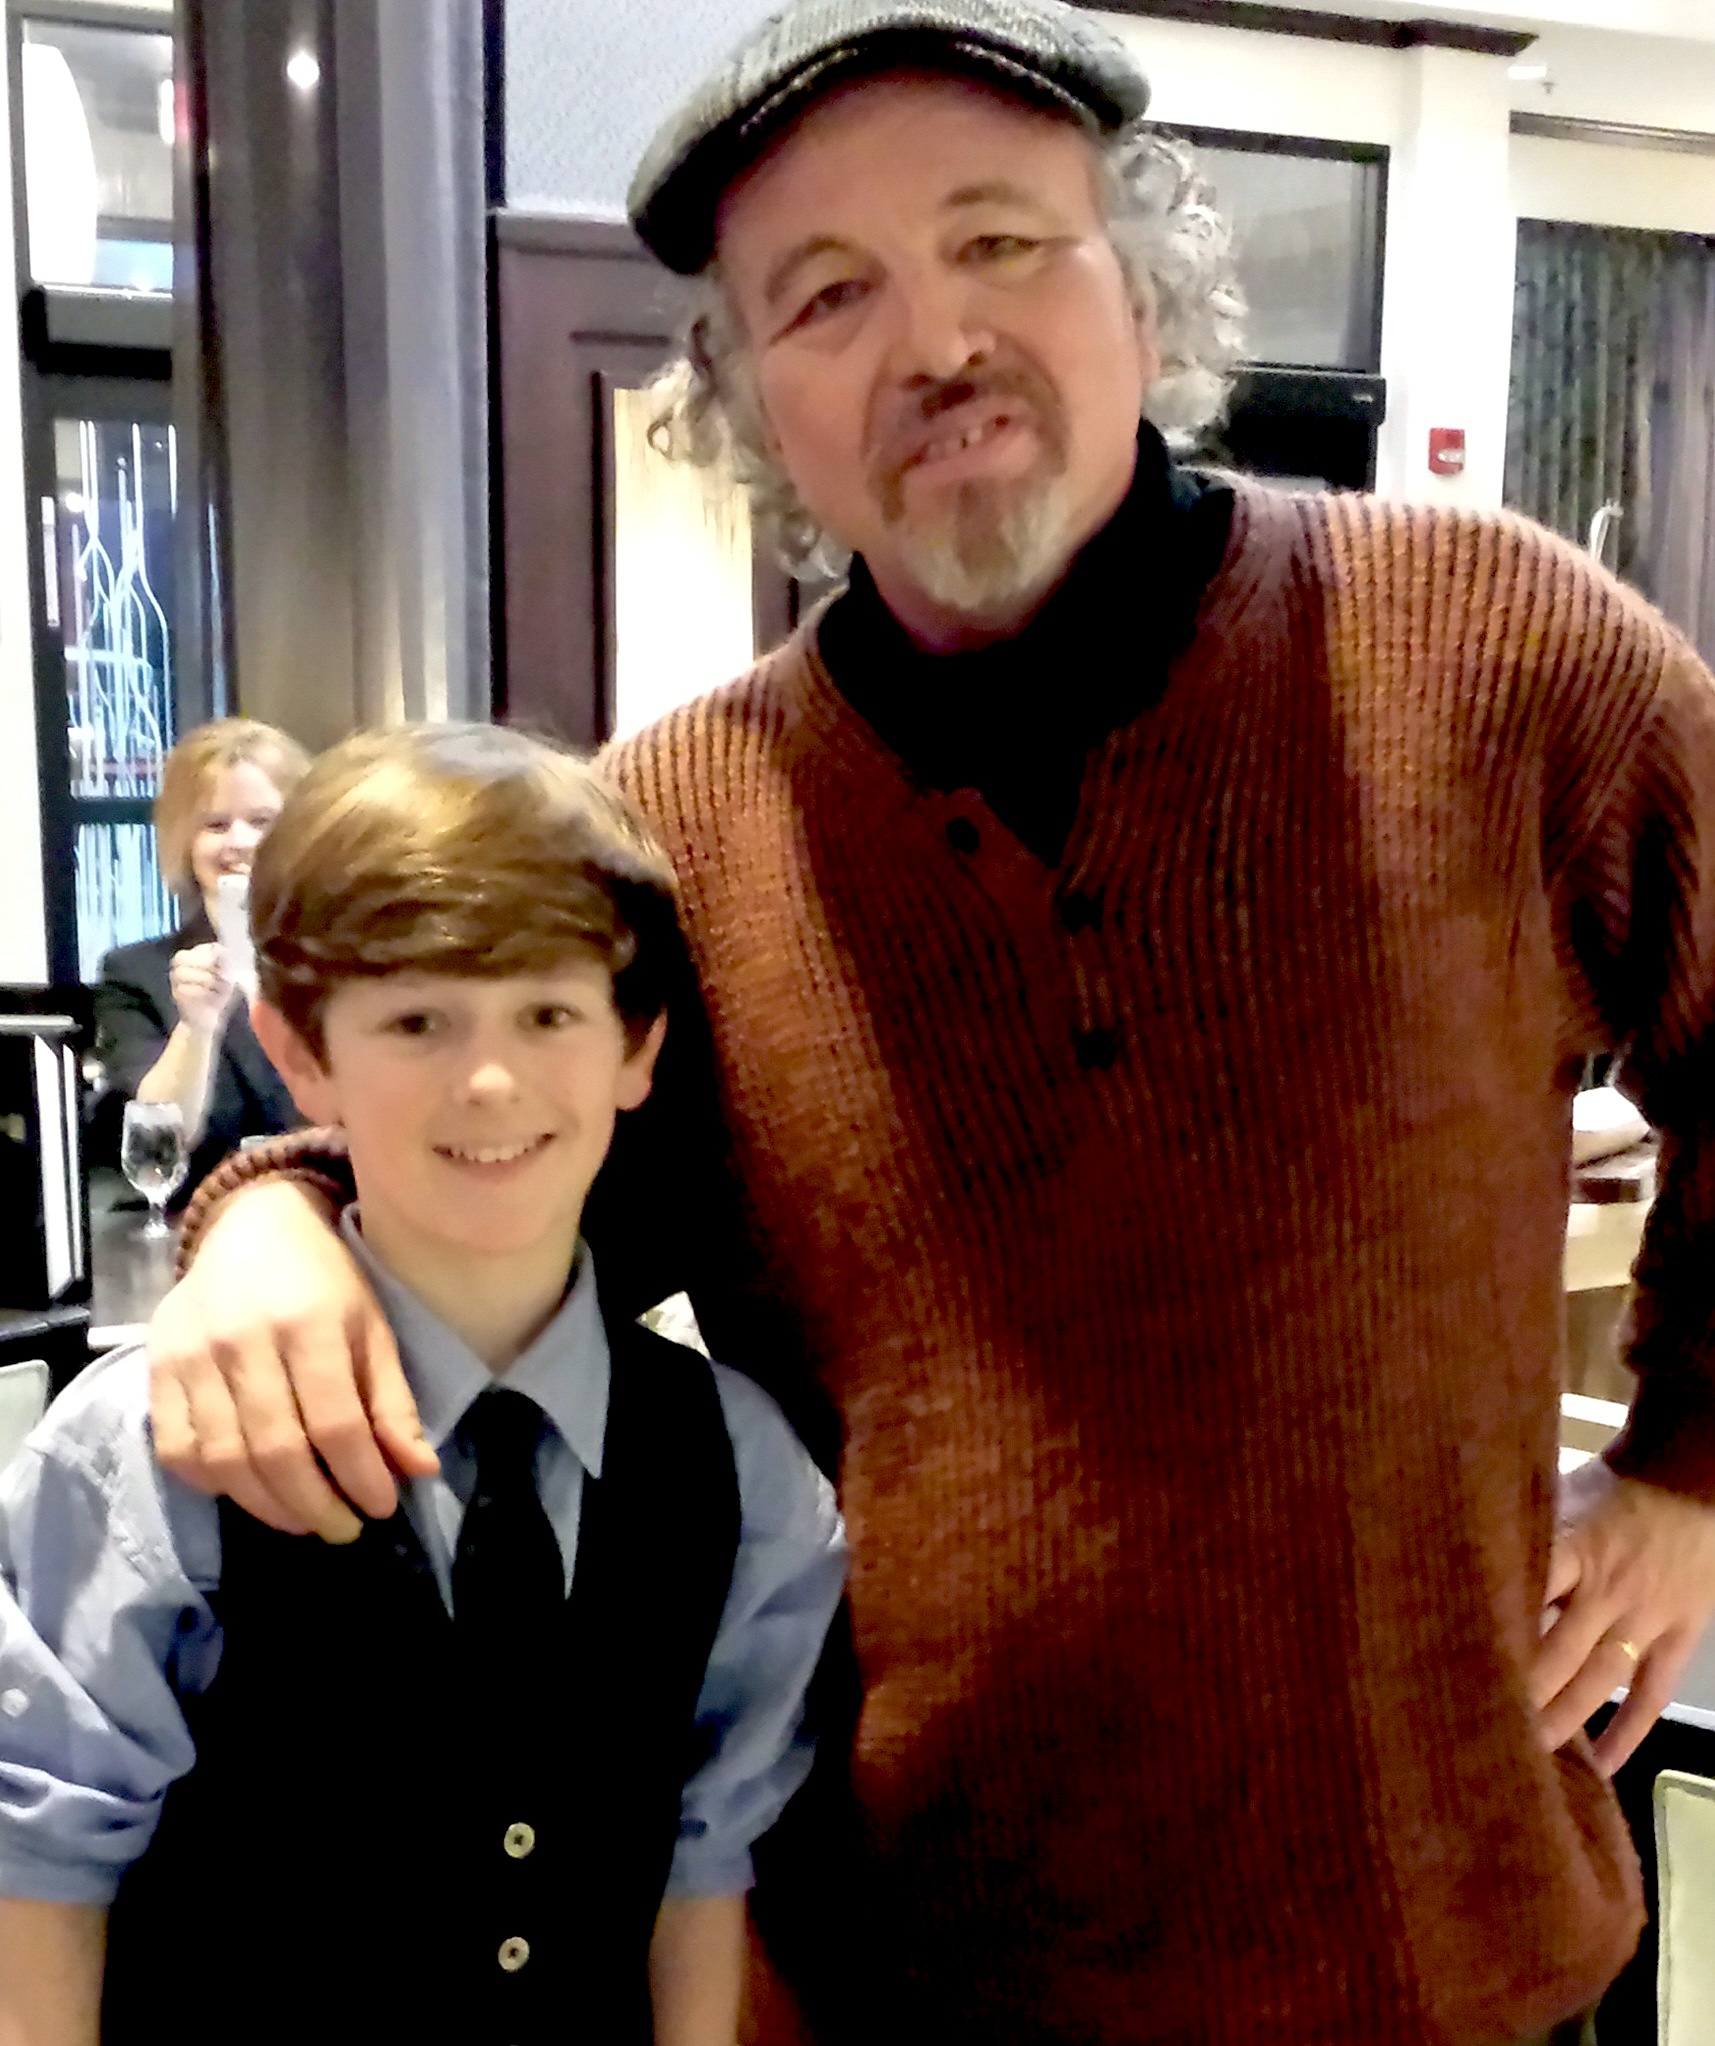 Joe Cipriano with Clint Howard, movie premiere after party.